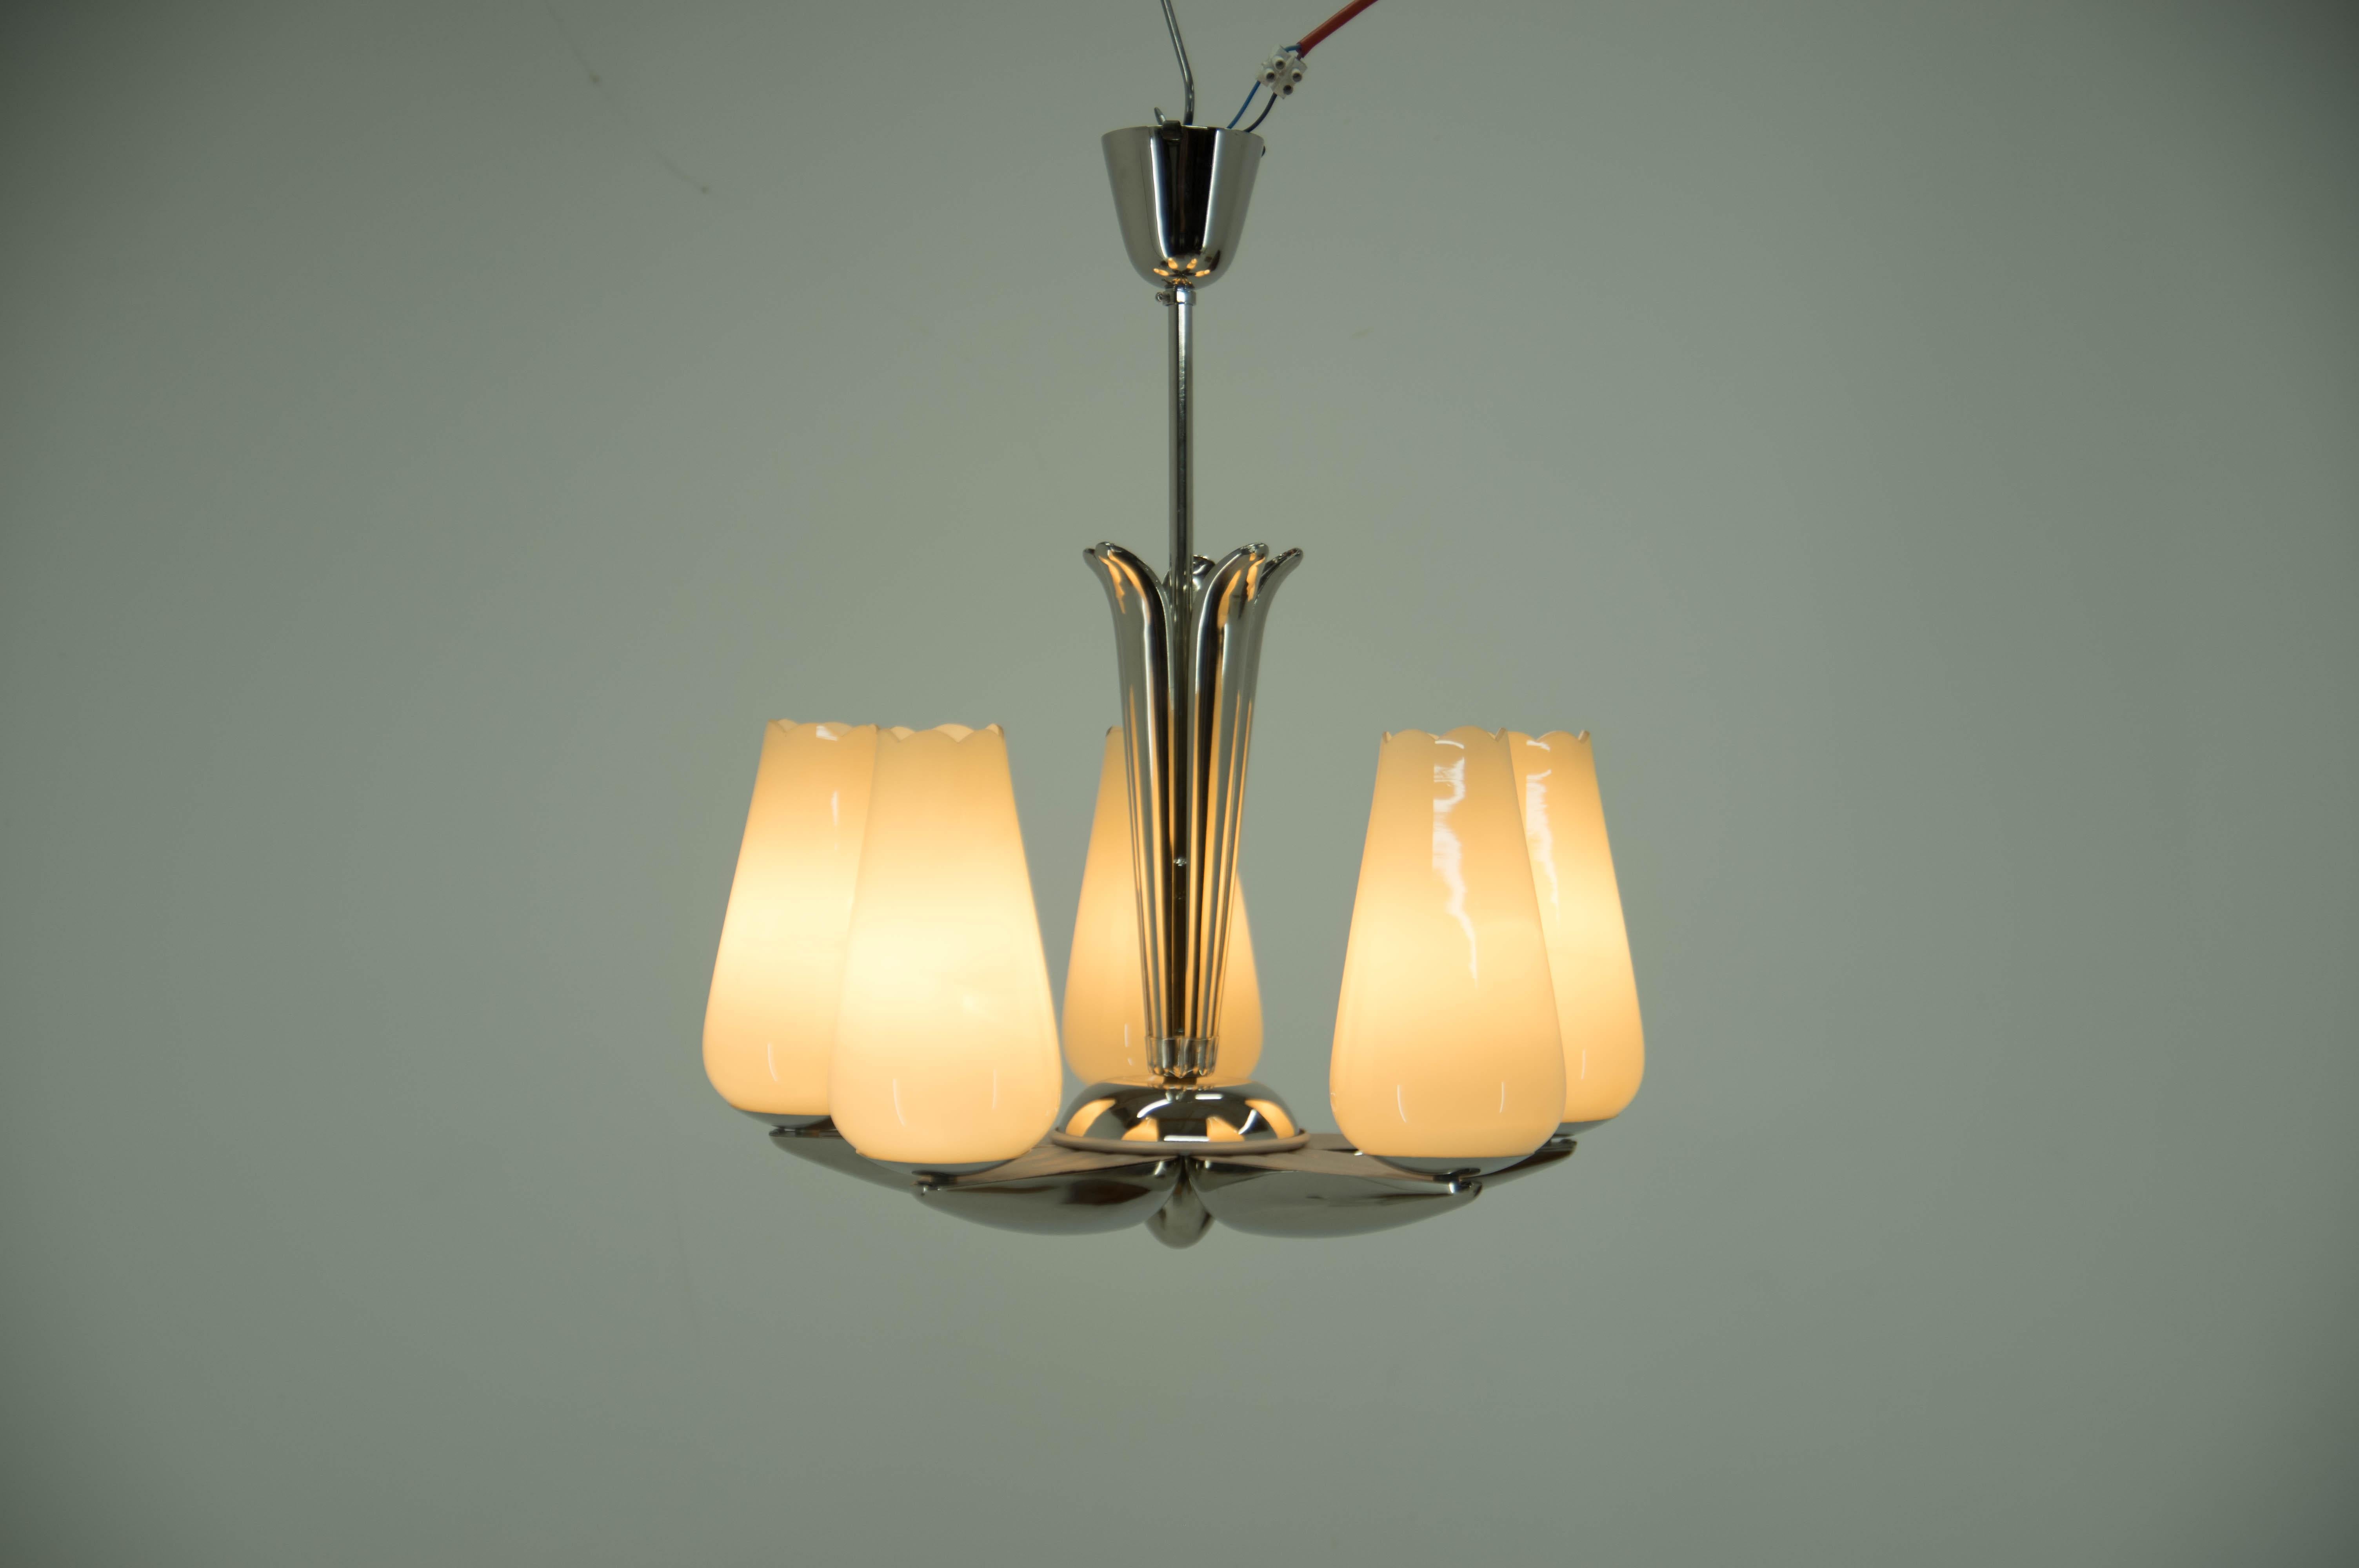 Czech Rare Nickel-Plated Chandelier by Drukov, 1940s For Sale